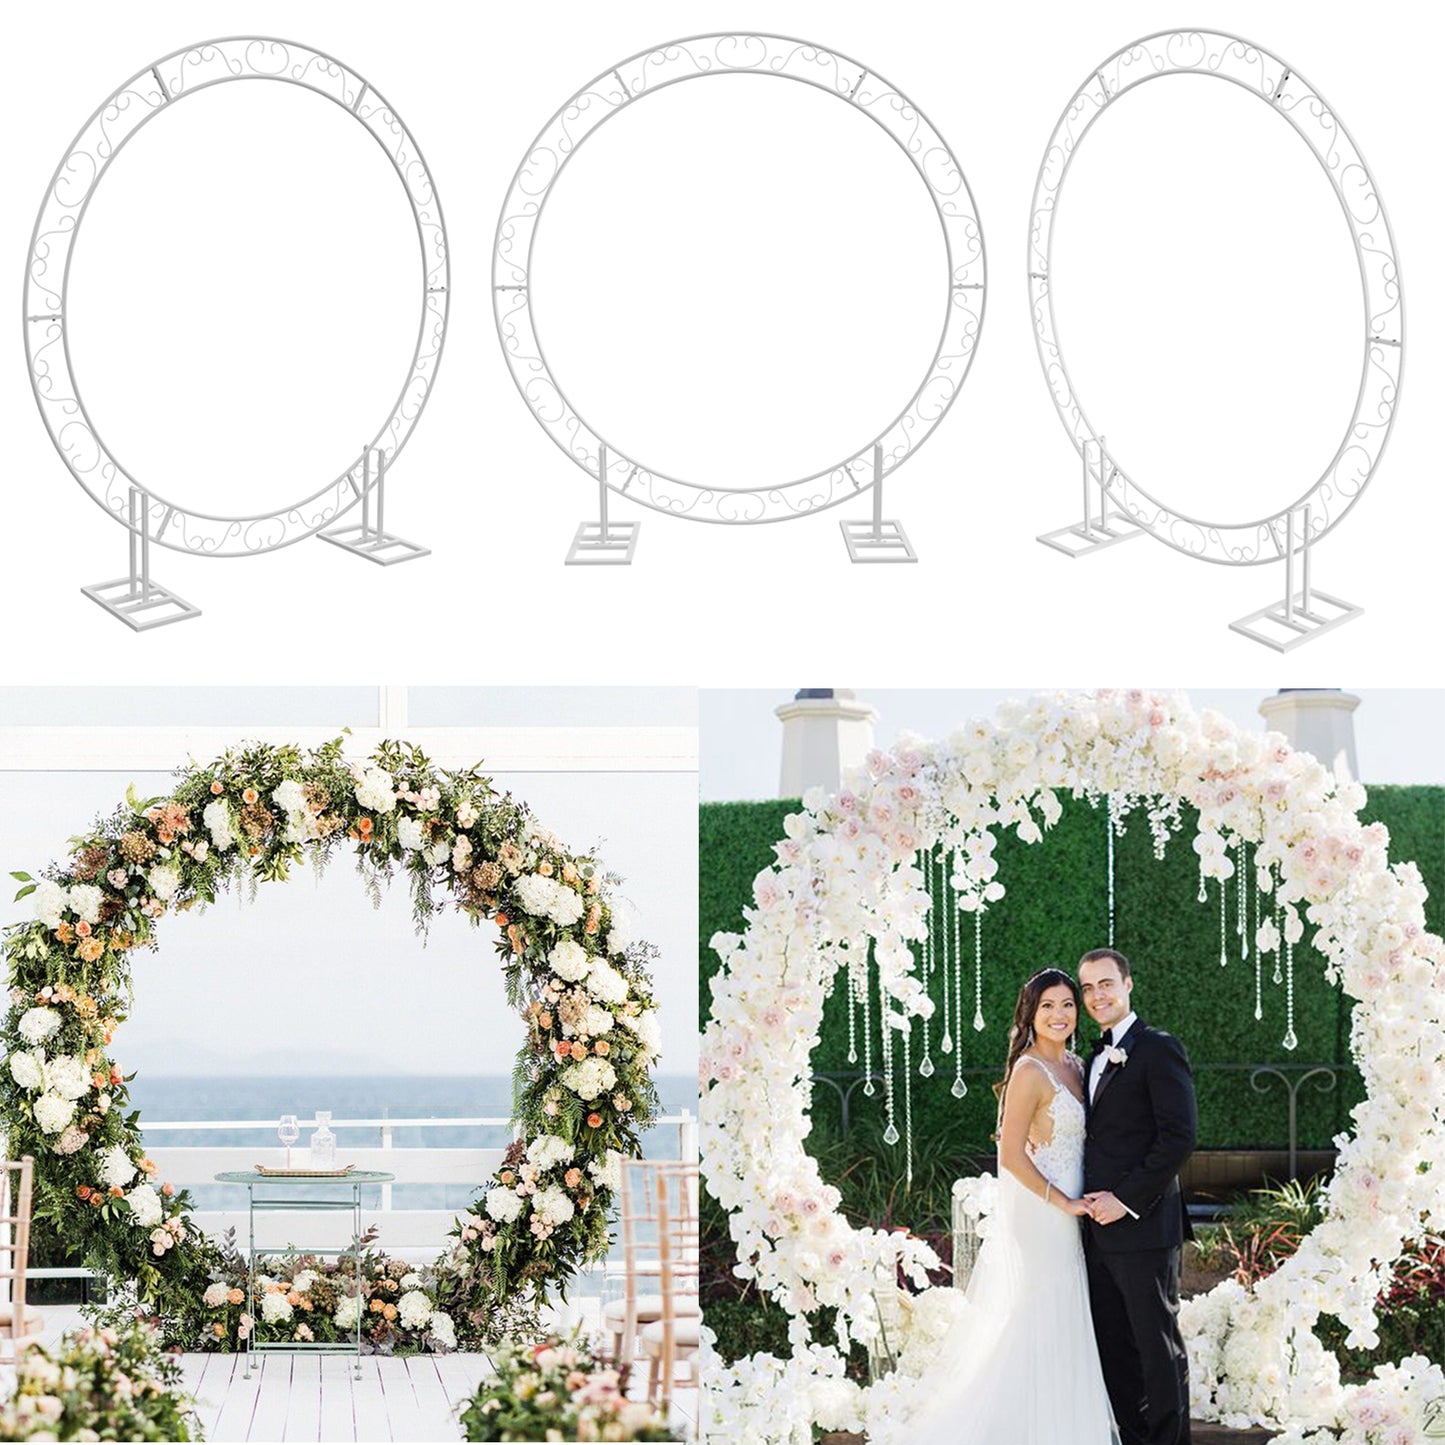 Iron Wedding Archway Backdrop Prop for Ceremony Party Decoration 8.2ft Circle Balloon Arch